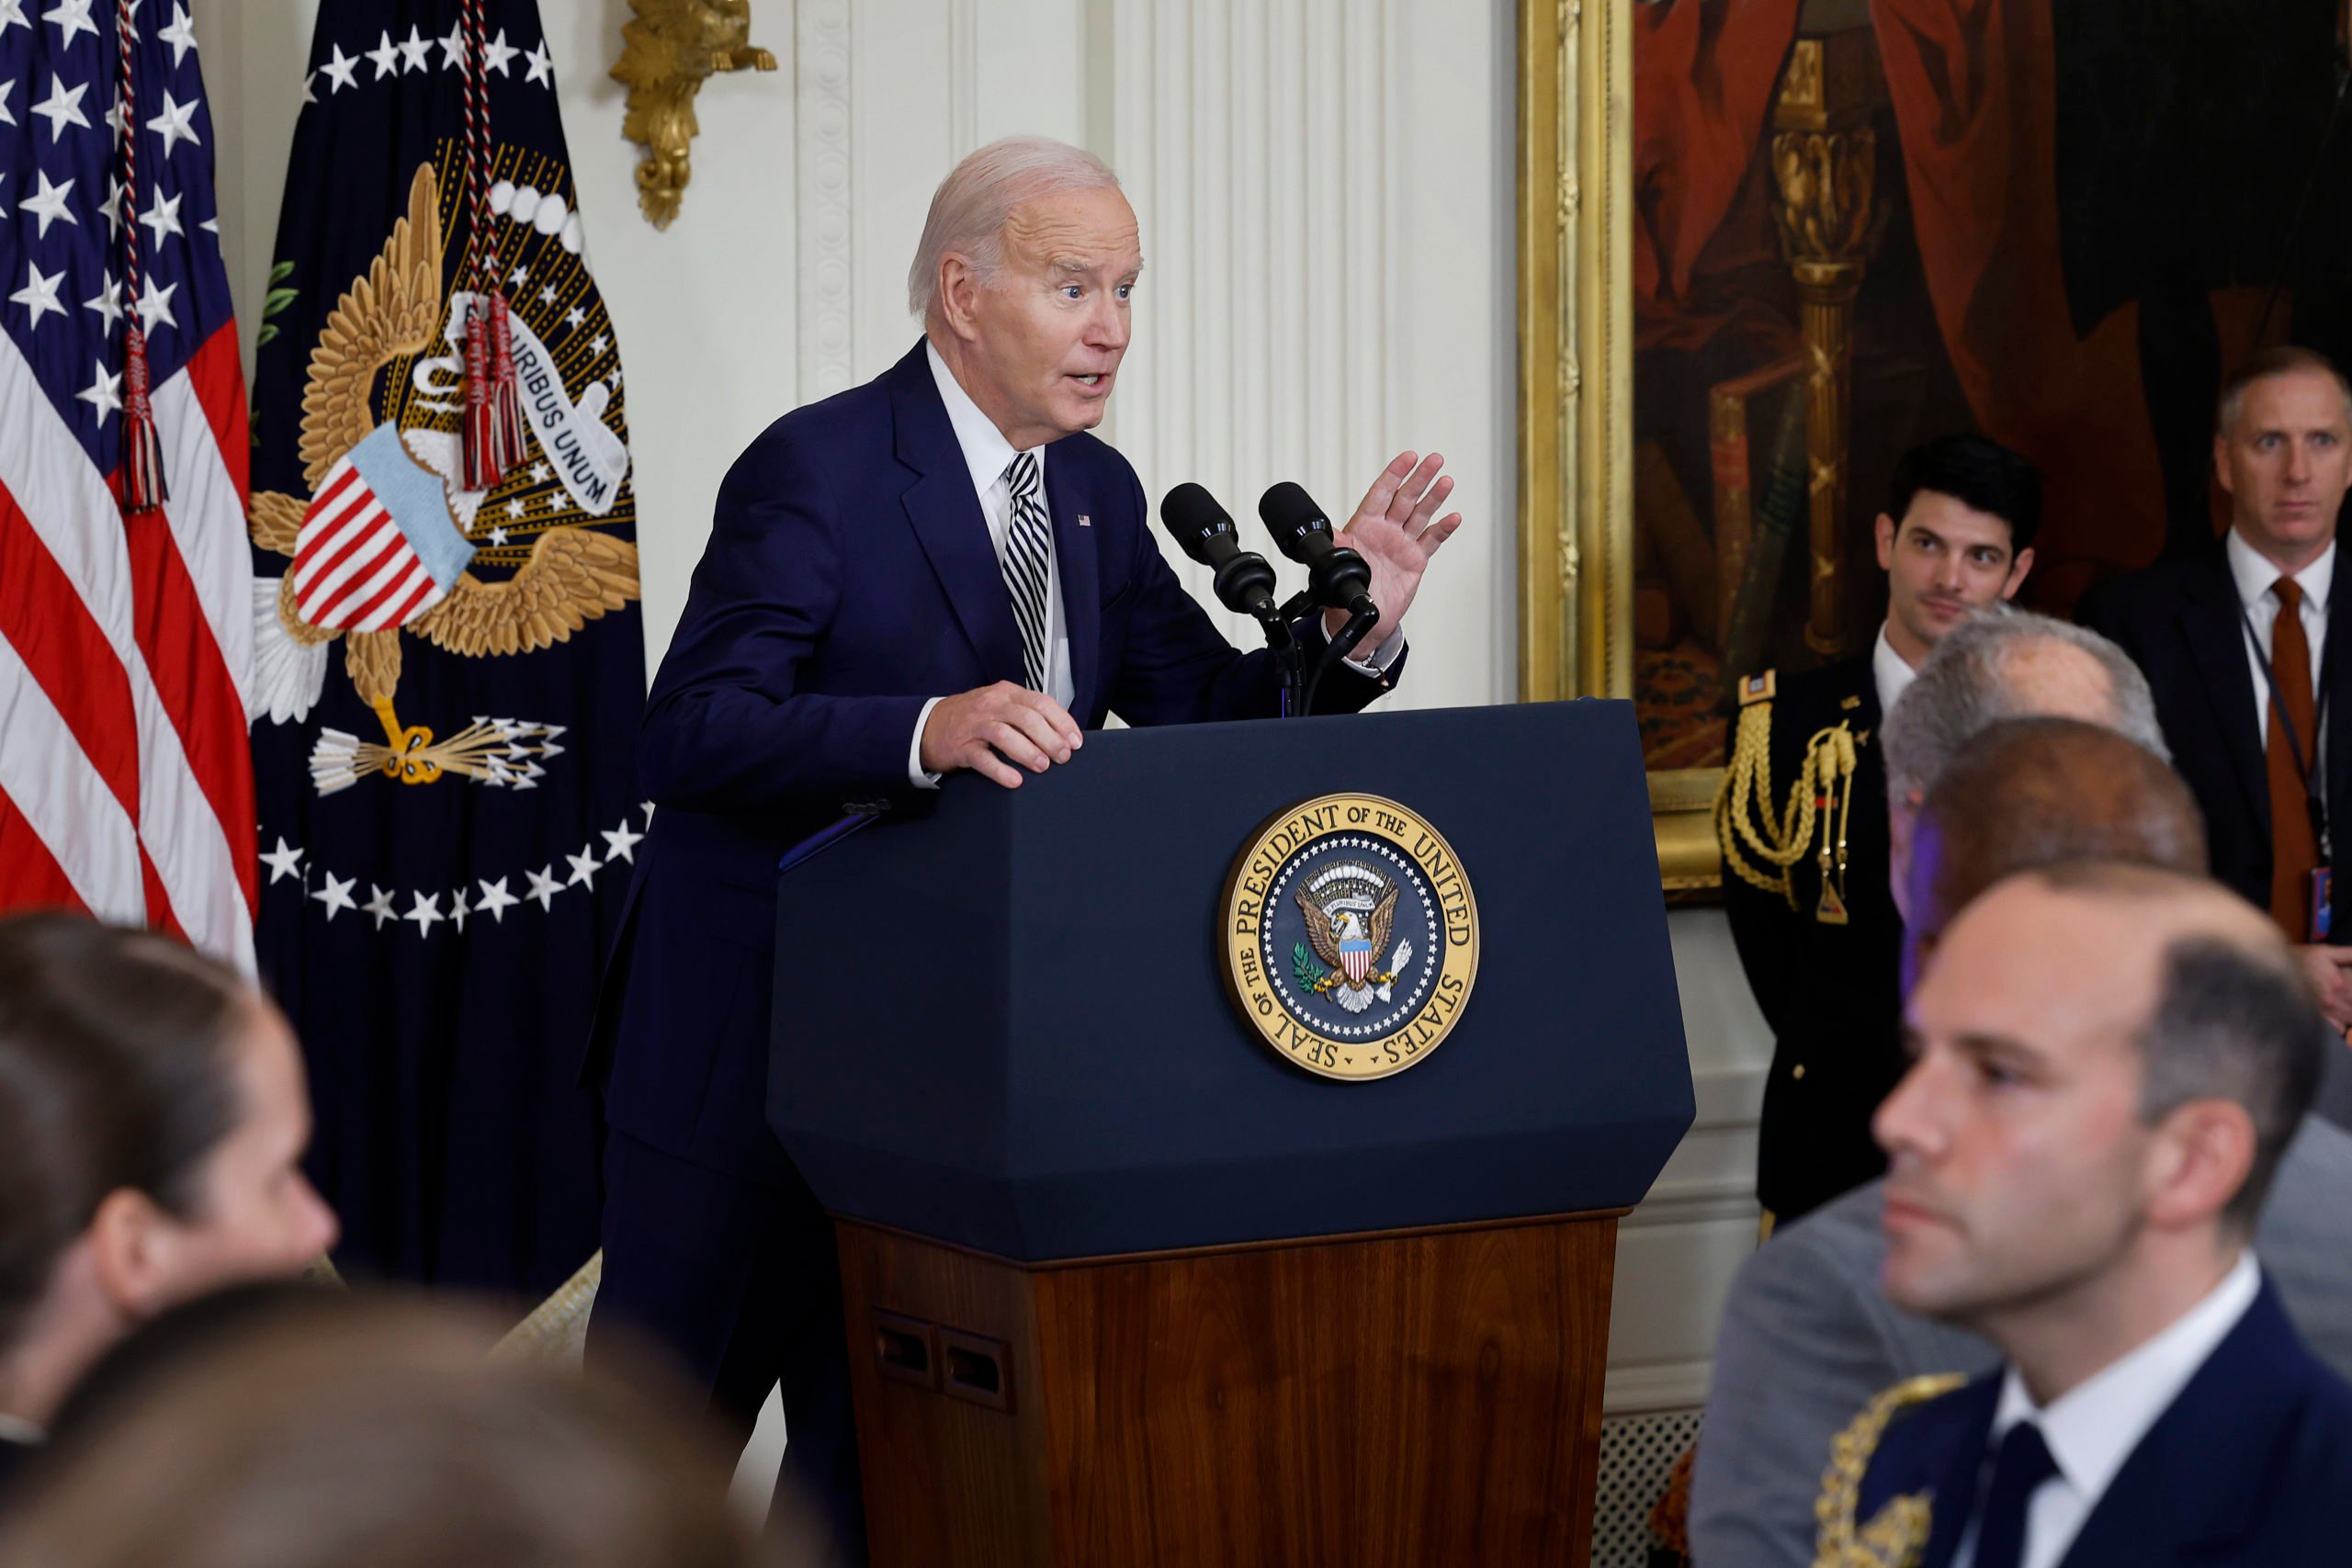 U.S. President Joe Biden delivers remarks about his administration's approach to artificial intelligence during an event in the East Room of the White House on October 30, 2023 in Washington, DC. President Biden issued a new executive order on Monday, directing his administration to create a new chief AI officer, track companies developing the most powerful AI systems, adopt stronger privacy policies and "both deploy AI and guard against its possible bias," creating new safety guidelines and industry standards. (Photo by Chip Somodevilla/Getty Images)